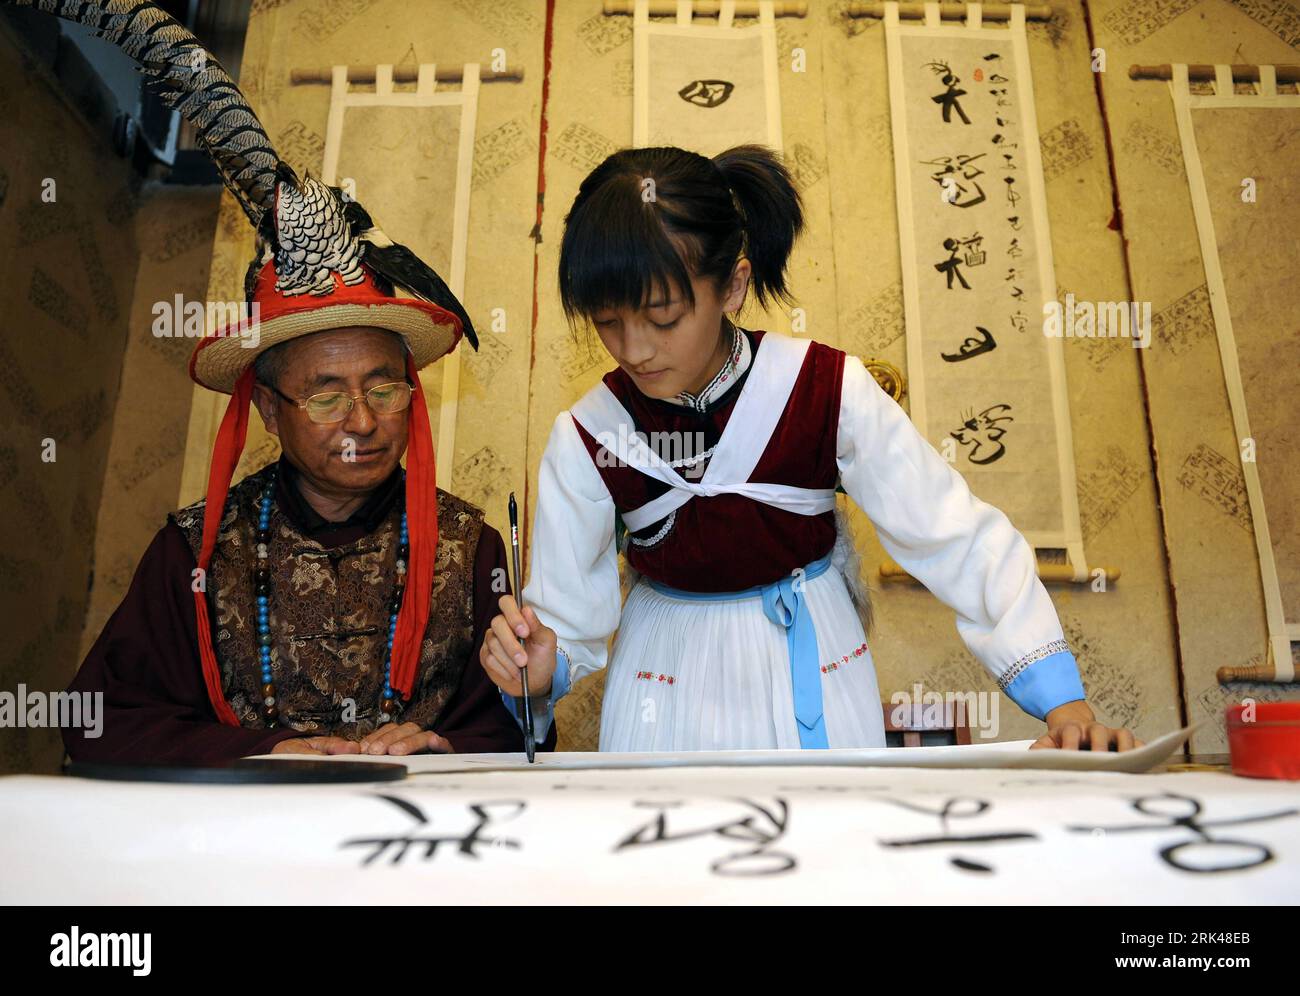 https://c8.alamy.com/comp/2RK48EB/bildnummer-53599800-datum-26102009-copyright-imagoxinhua-091115-lijiang-nov-15-2009-xinhua-he-siqi-learns-to-write-characters-of-the-language-of-the-naxi-ethnic-group-in-lijiang-city-southwest-china-s-yunnan-province-oct-26-2009-with-a-cartoon-style-appearance-of-a-pointed-chin-big-eyes-and-neat-bangs-he-siqi-a-14-year-old-student-of-3rd-grade-in-fuhui-middle-school-in-the-gucheng-district-of-lijiang-city-ever-won-the-environmental-protection-title-of-young-earth-guard-and-cultural-title-of-culture-preserver-of-the-naxi-ethnic-group-she-has-cared-for-the-environ-2RK48EB.jpg